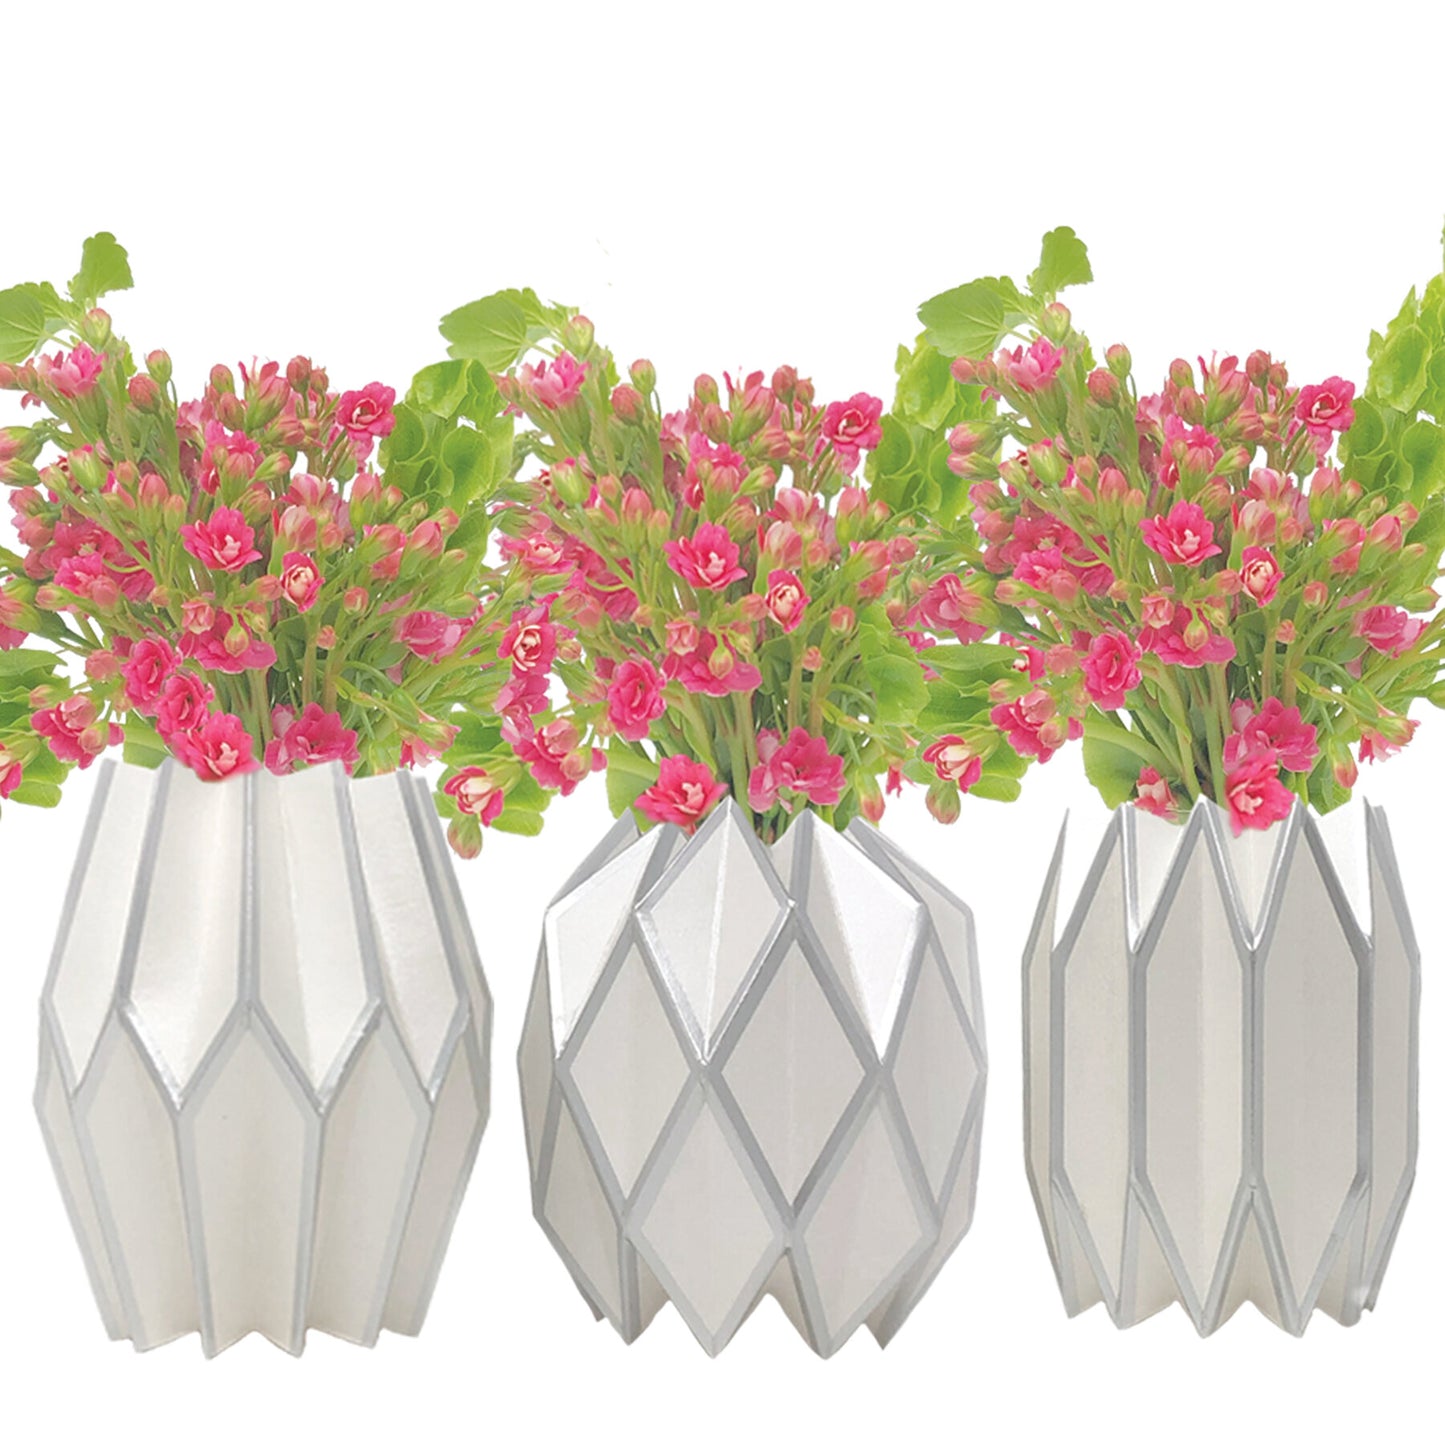 Silver and white paper vase sleeve centerpieces with pink flowers